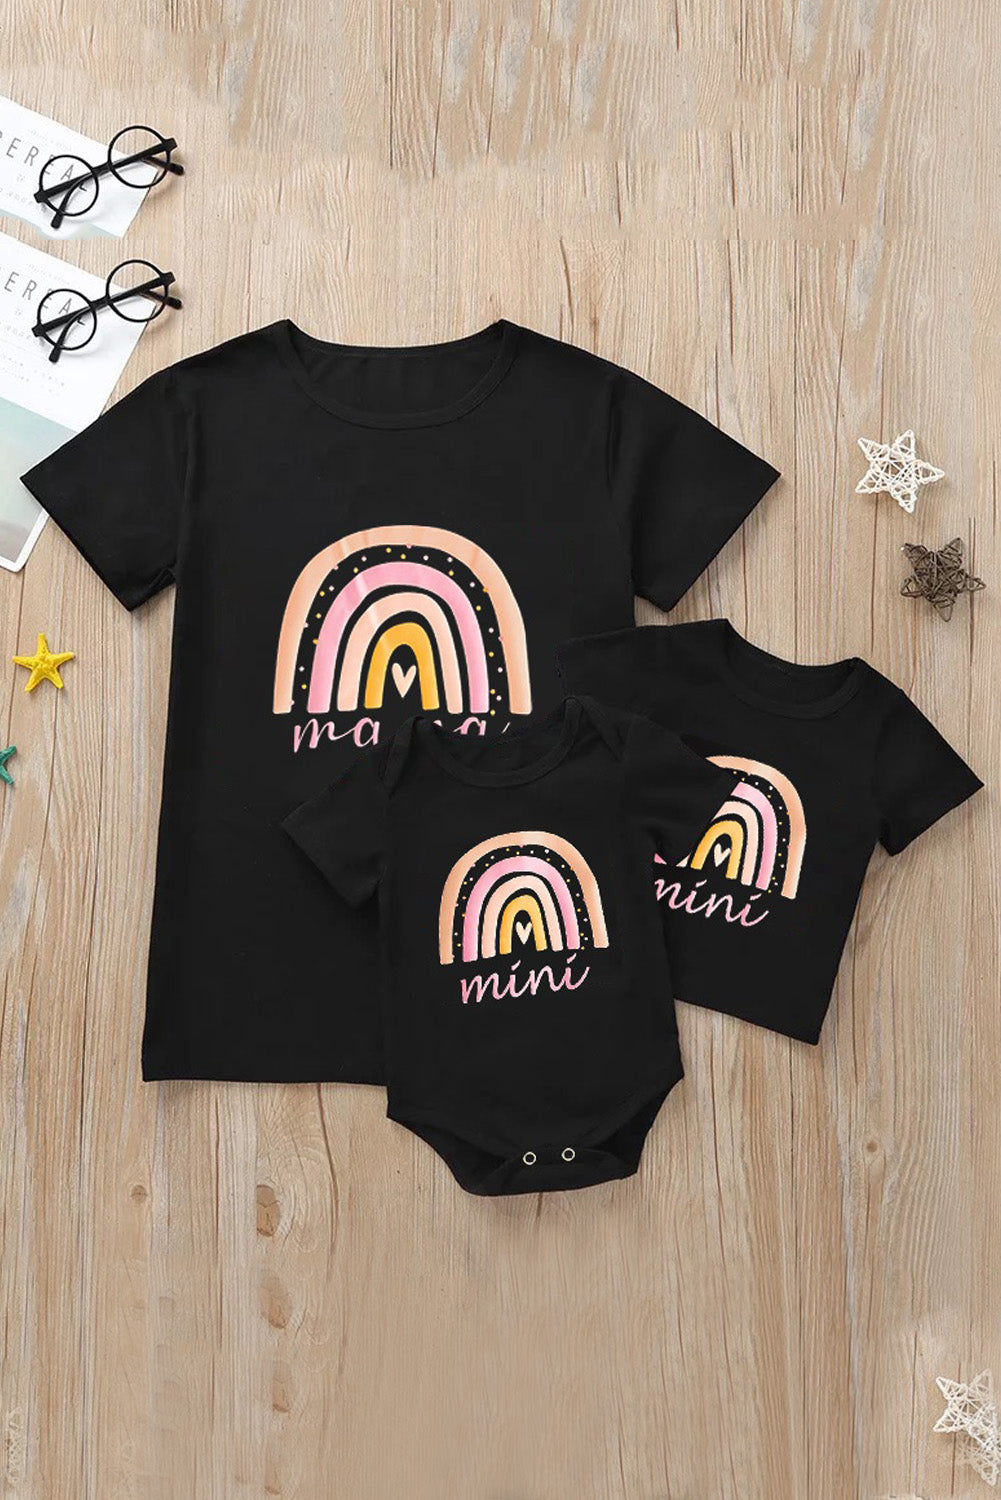 TZ25186-2-S, TZ25186-2-M, TZ25186-2-L, TZ25186-2-XL, TZ25186-2-XXL, Black Kids Mini Rainbow Print Crew Neck T Shirt Matching Outfit